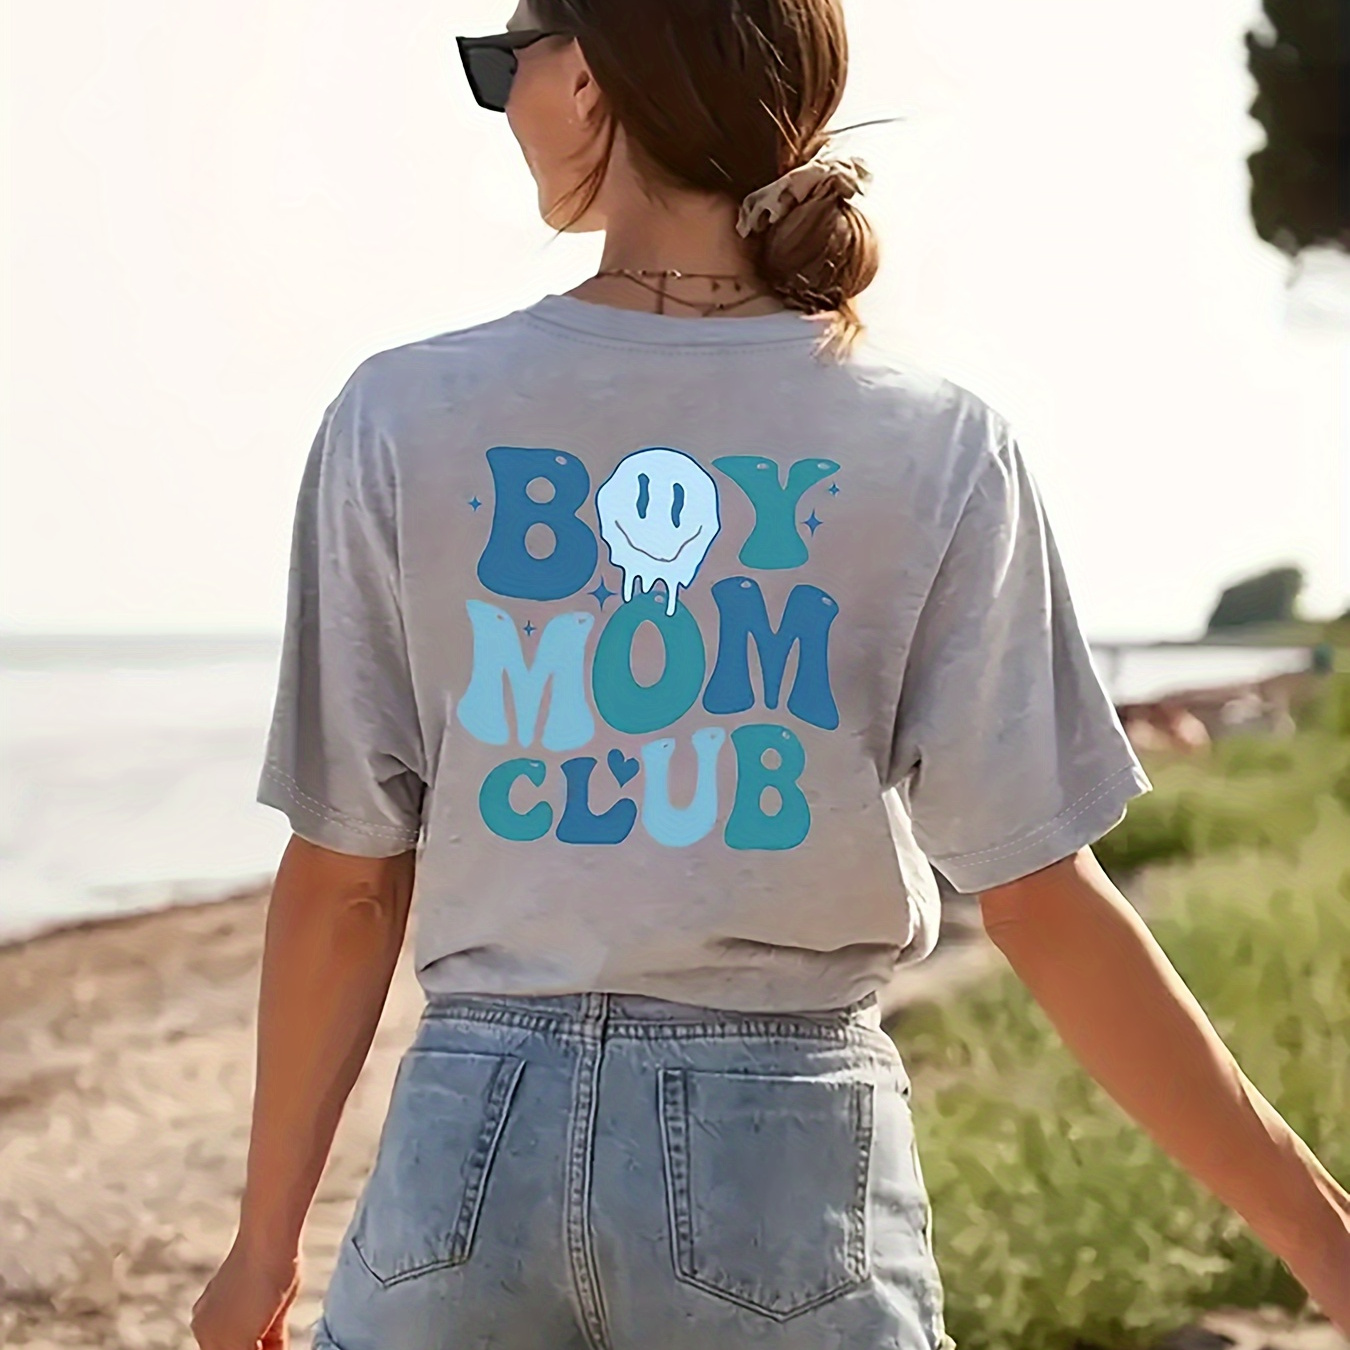 

Boy Mom Club Print T-shirt, Casual Crew Neck Short Sleeve Top For Spring & Summer, Women's Clothing